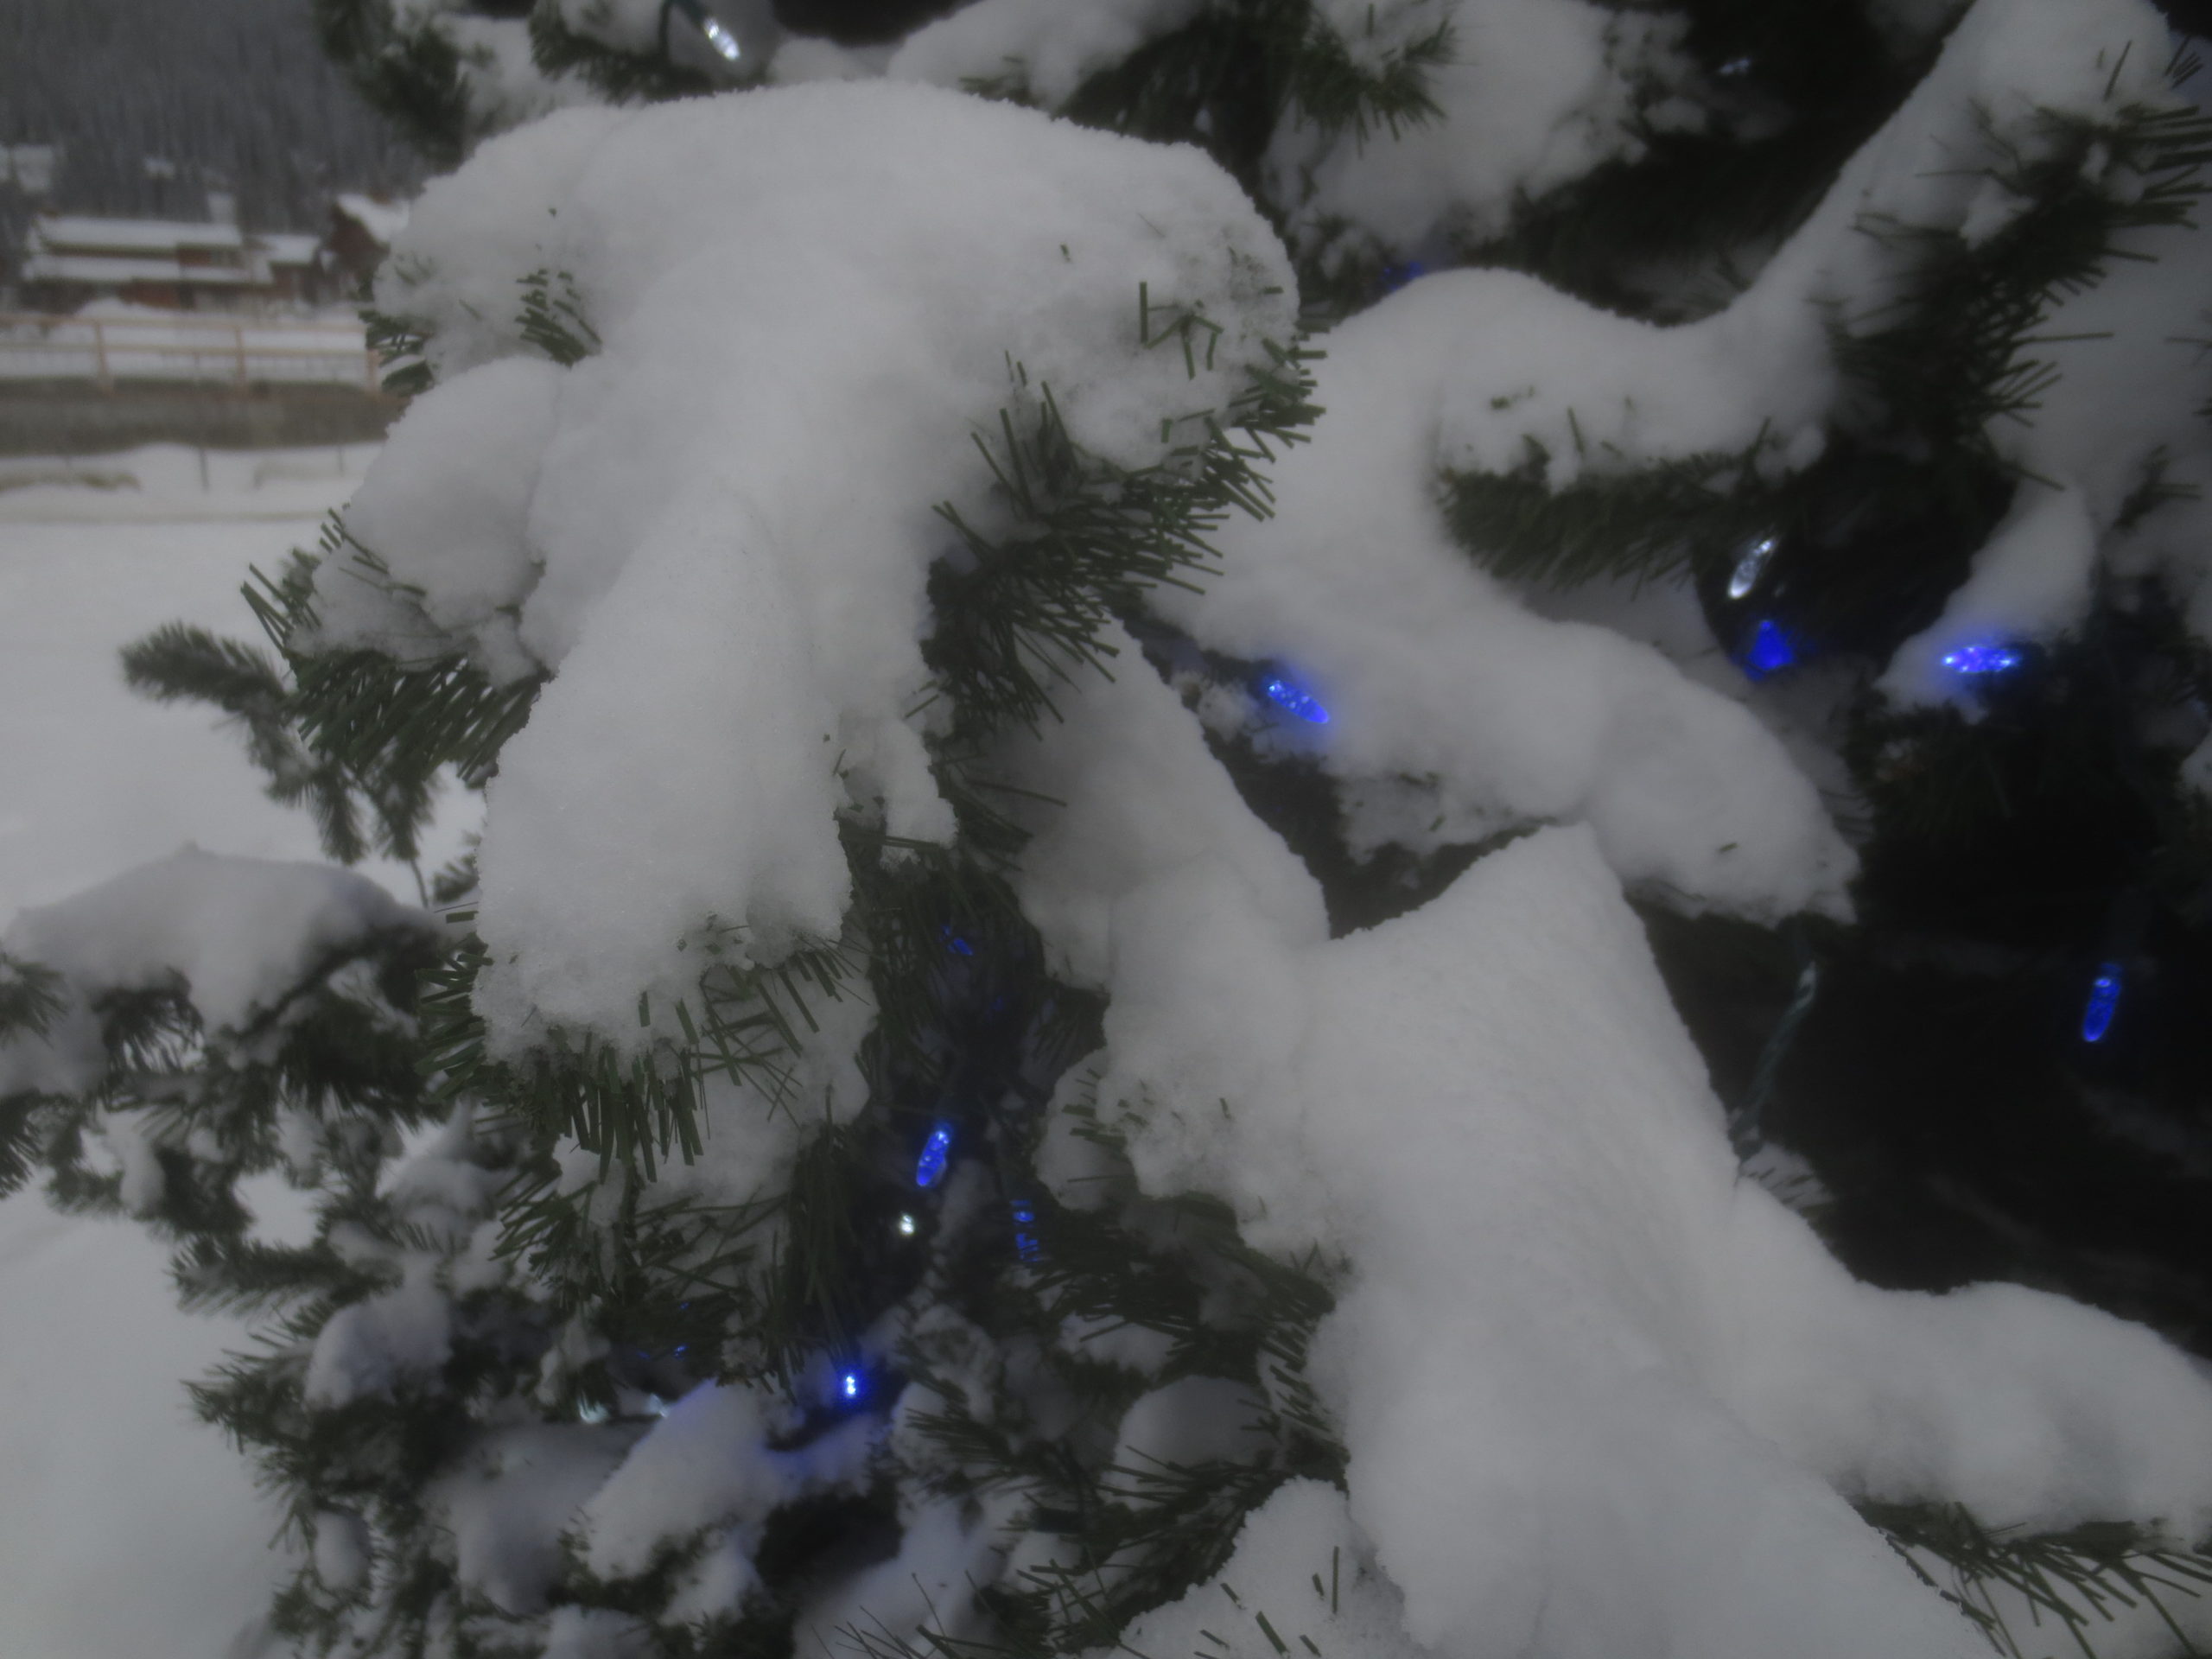 branches of a Christmas tree covered in snow with blue lights among them